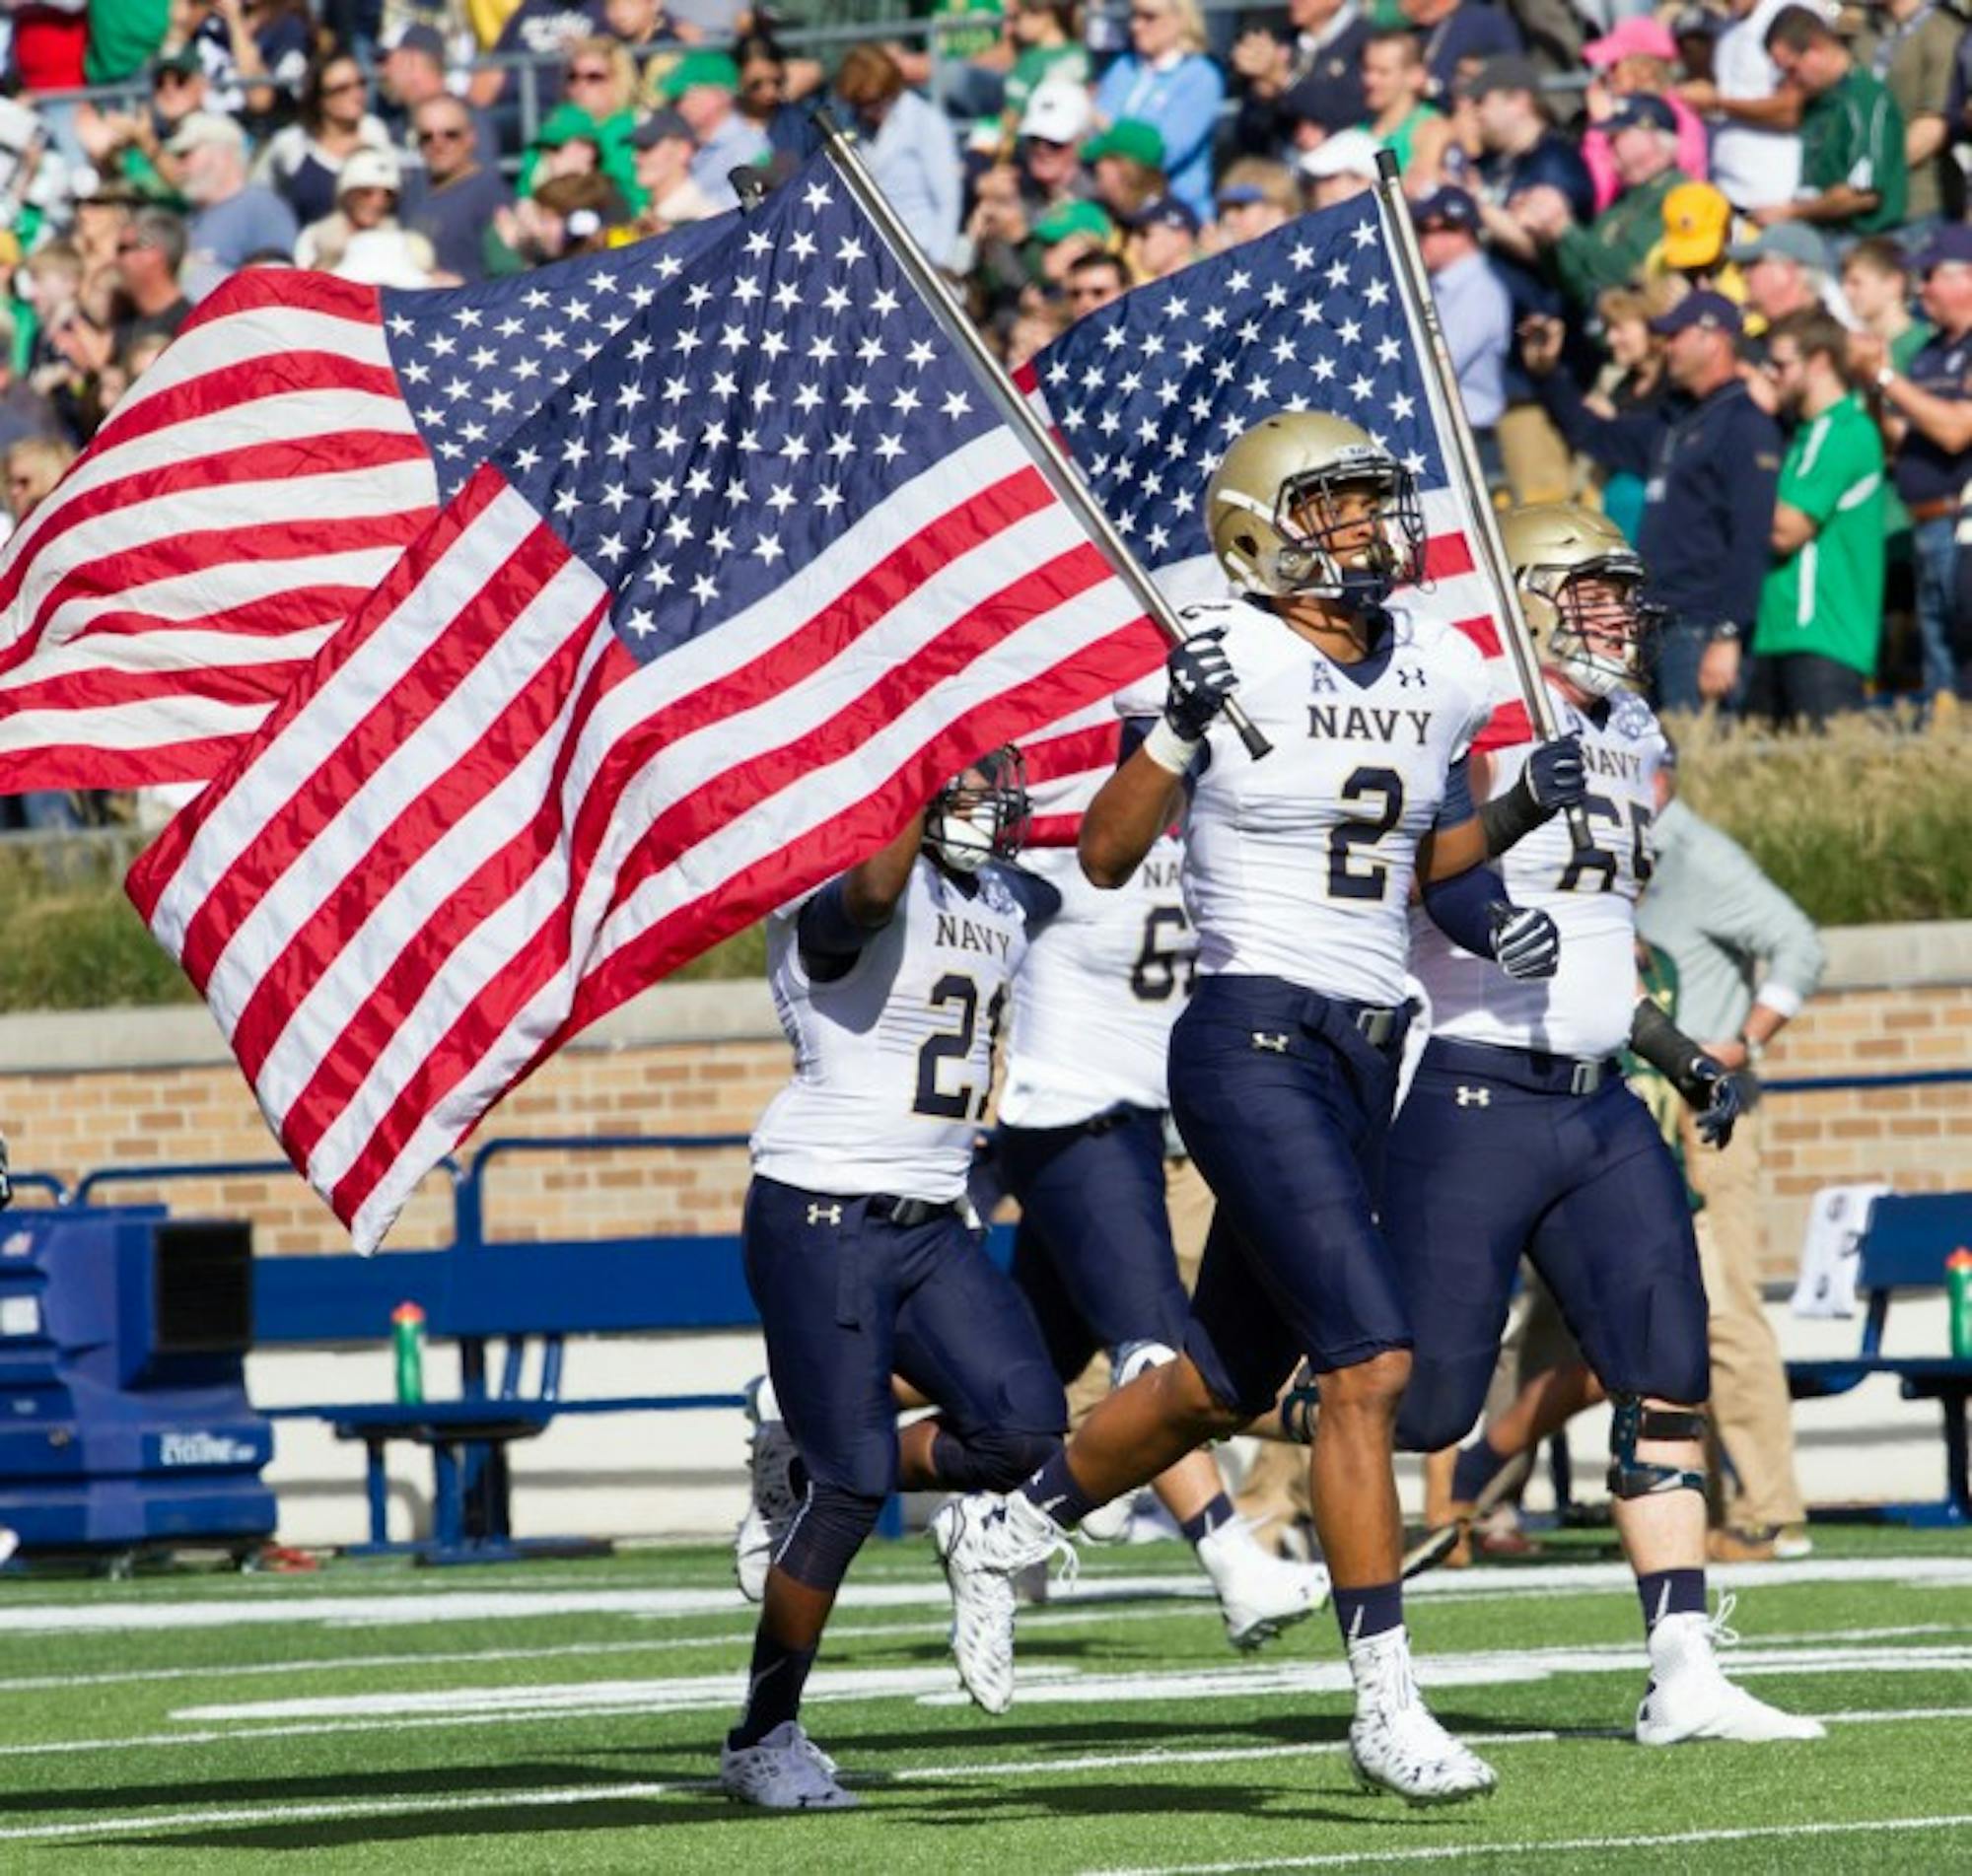 Navy players take the field carrying American flags before the game Saturday at Notre Dame Stadium.